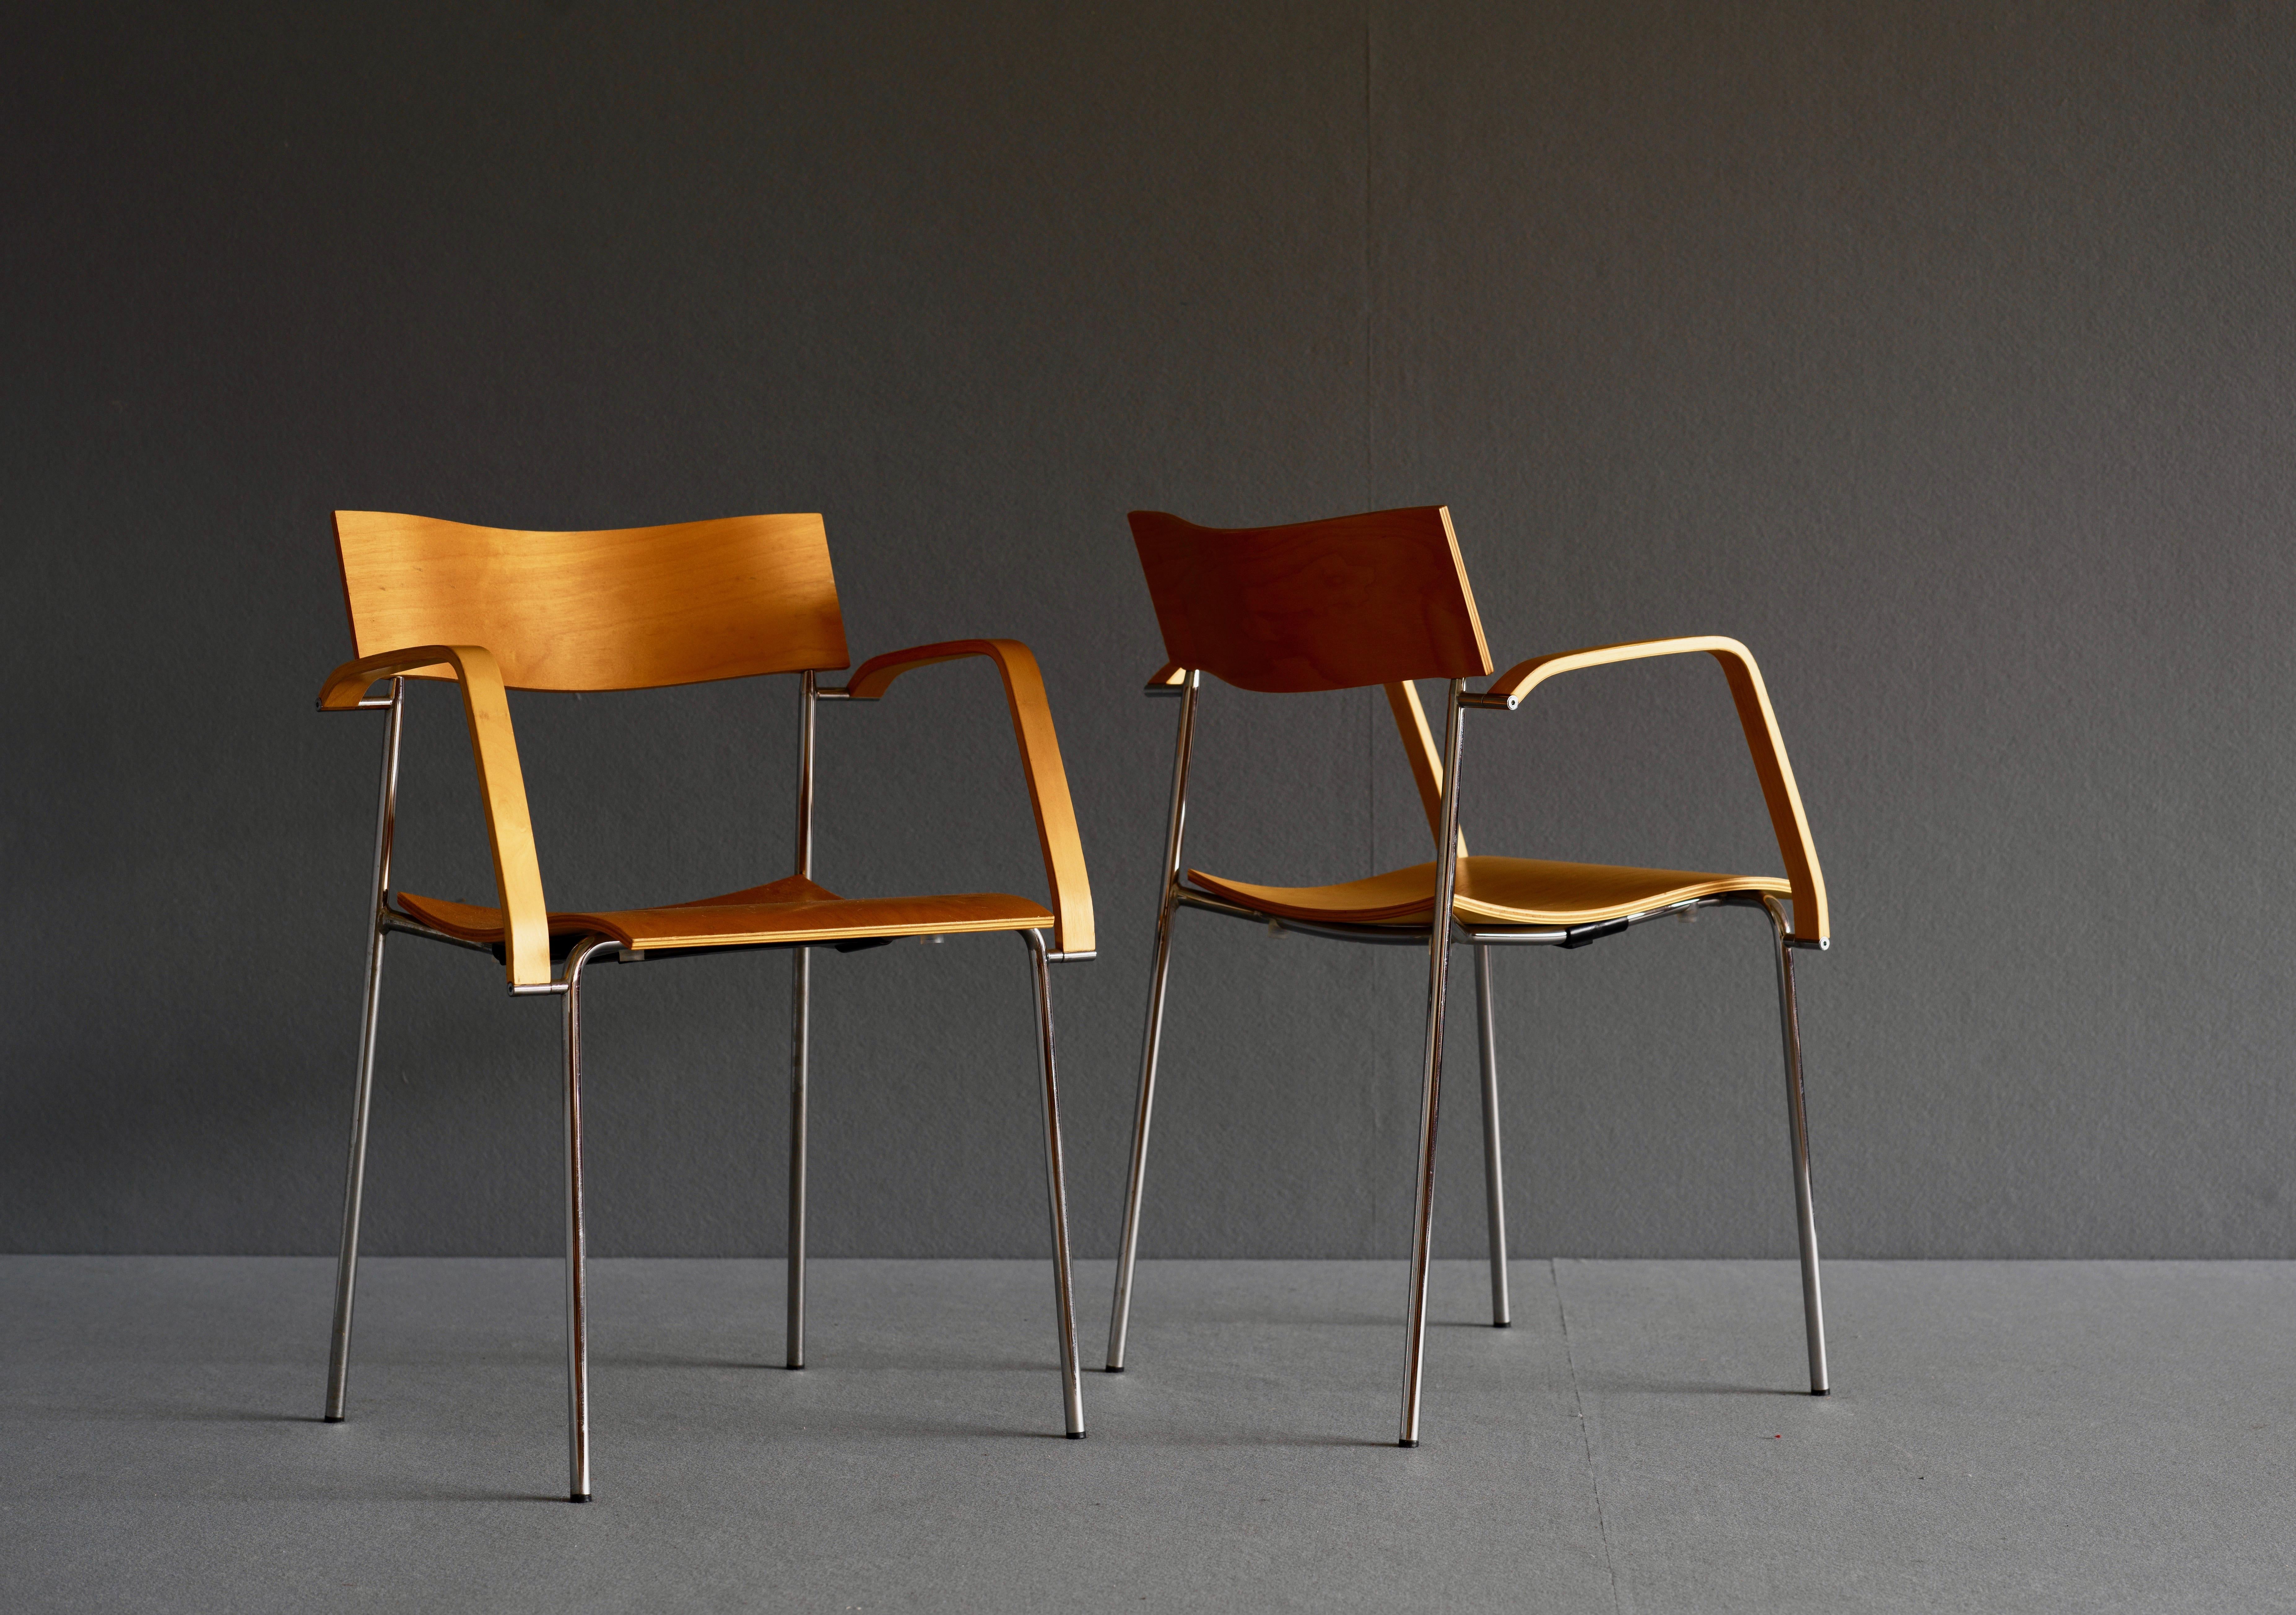 Well designed stackable chair by Peter Hiort-Lorenzen and Johannes Foersom designed for Lammhults and is part of the “Campus” series. It is in maple and has a steel frame.